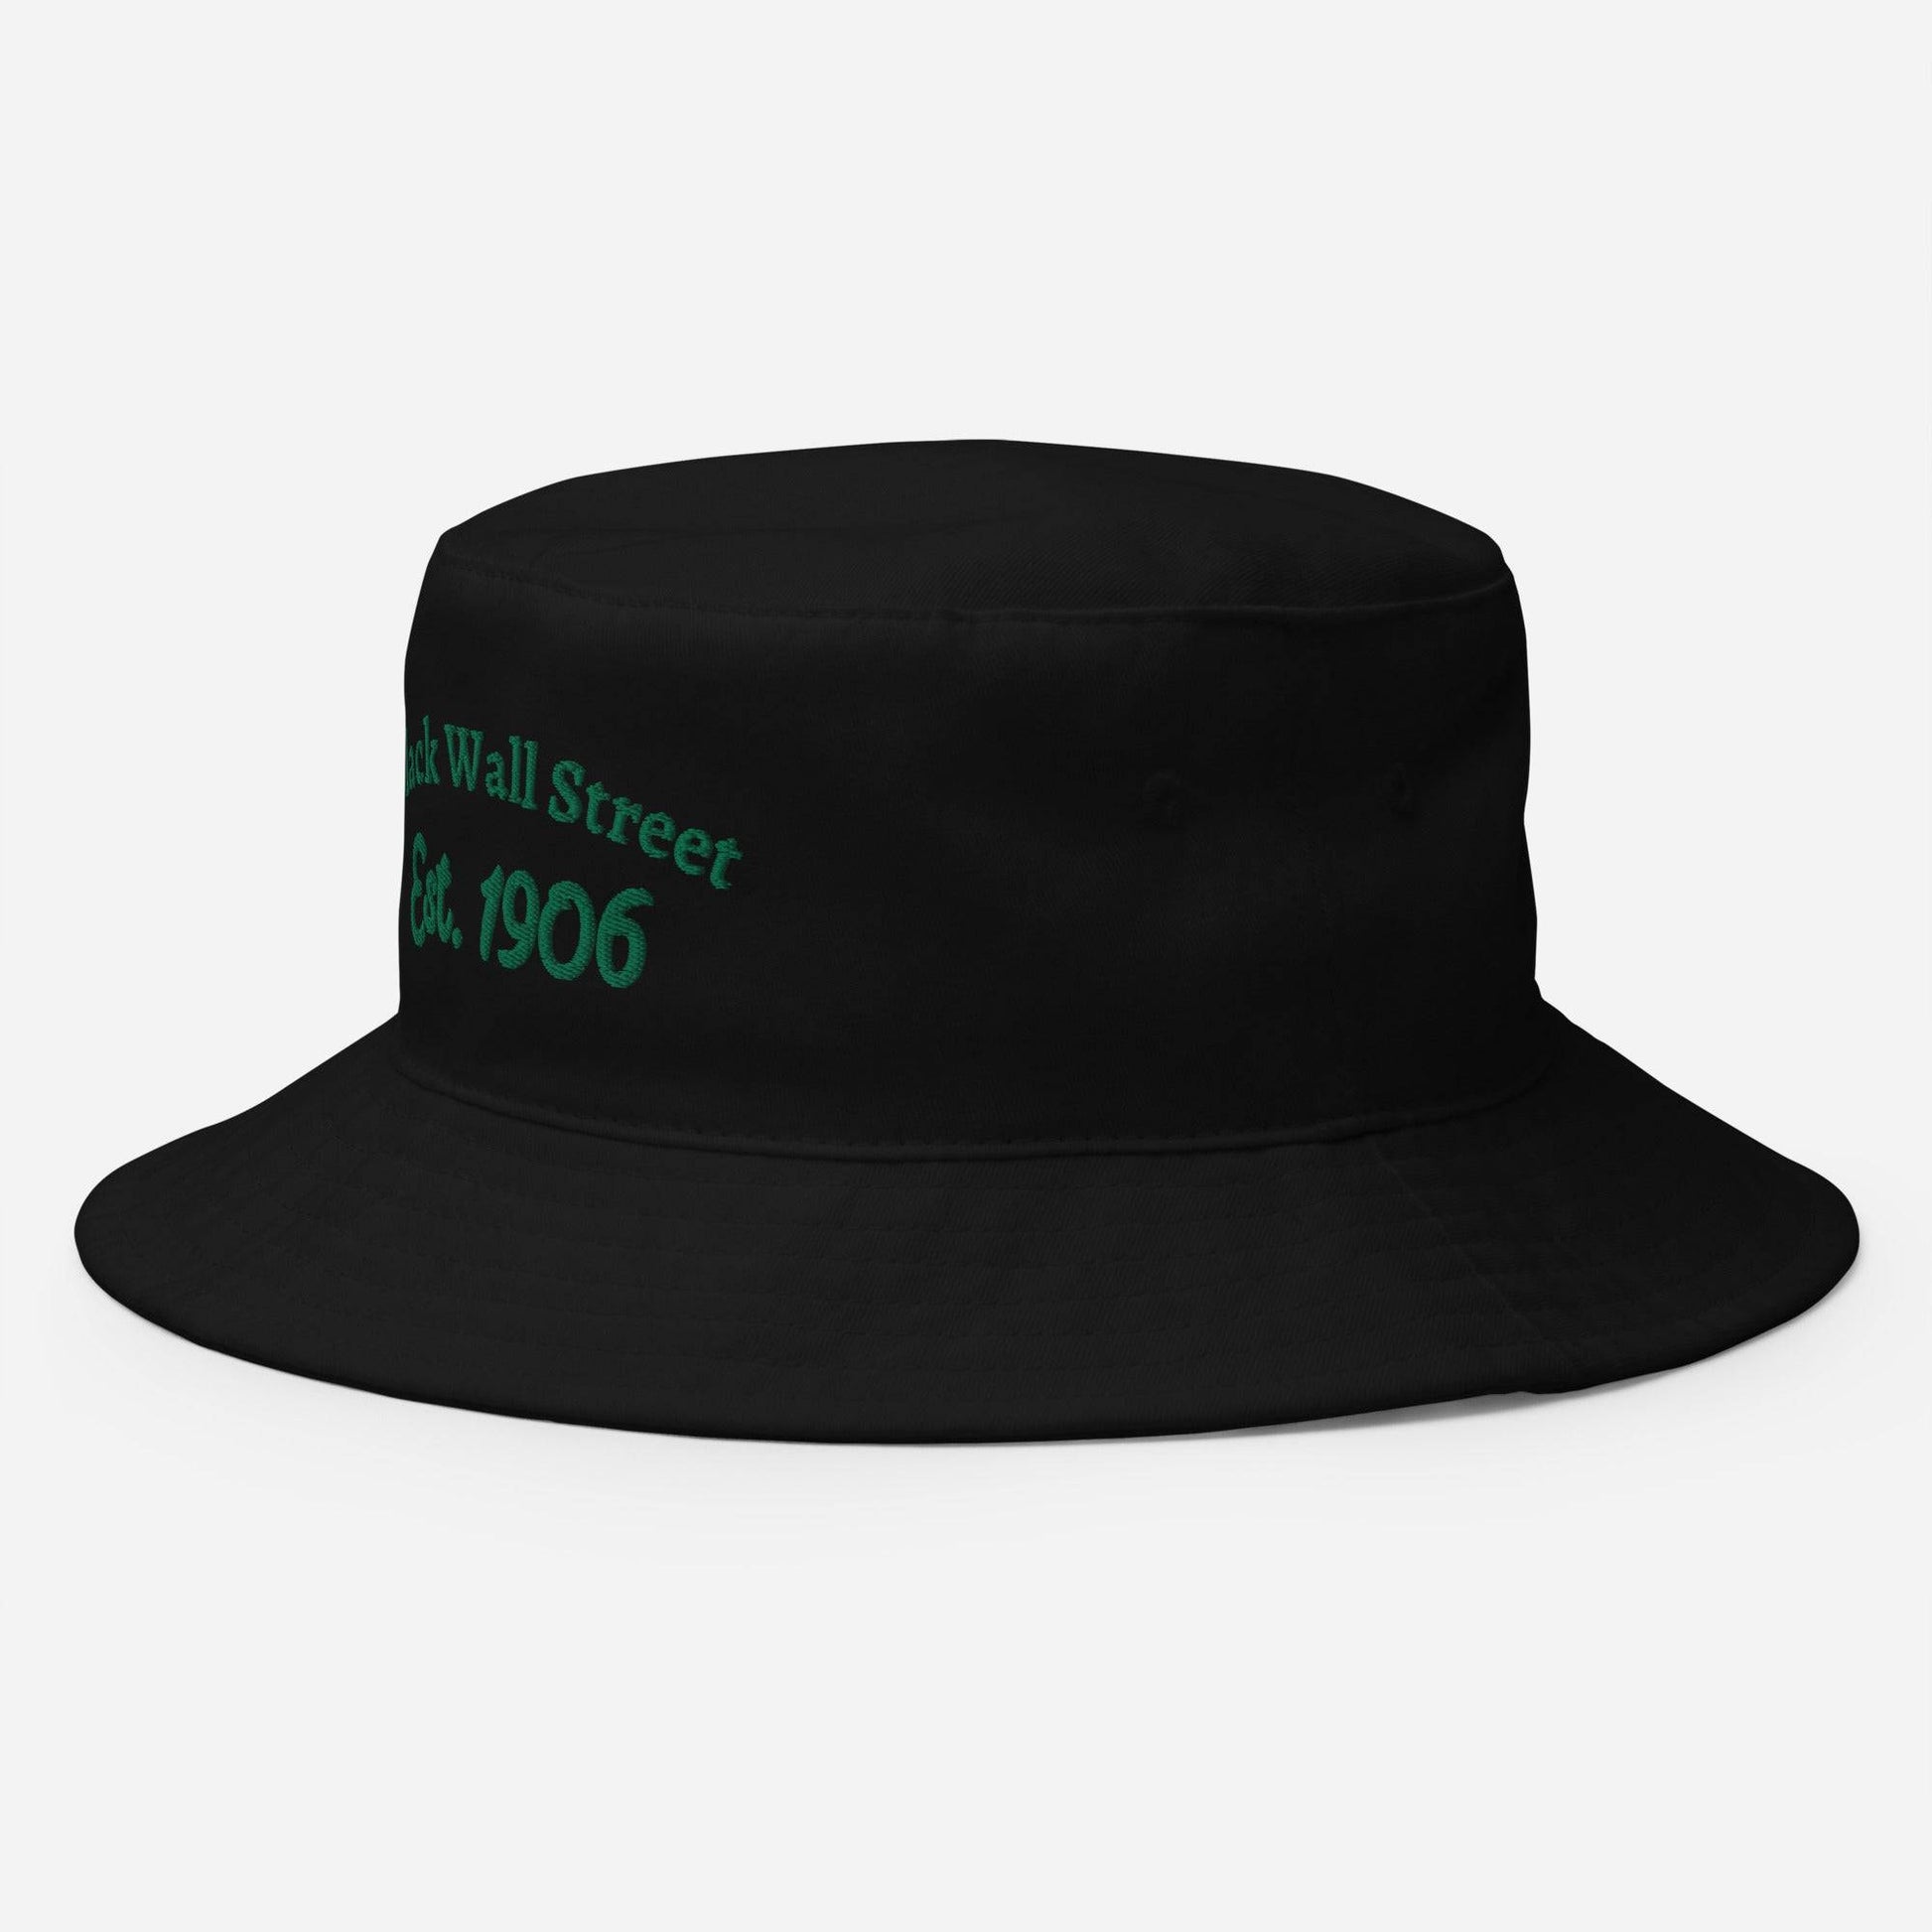 black bucket hat with black wall street est 1906 embroider on it